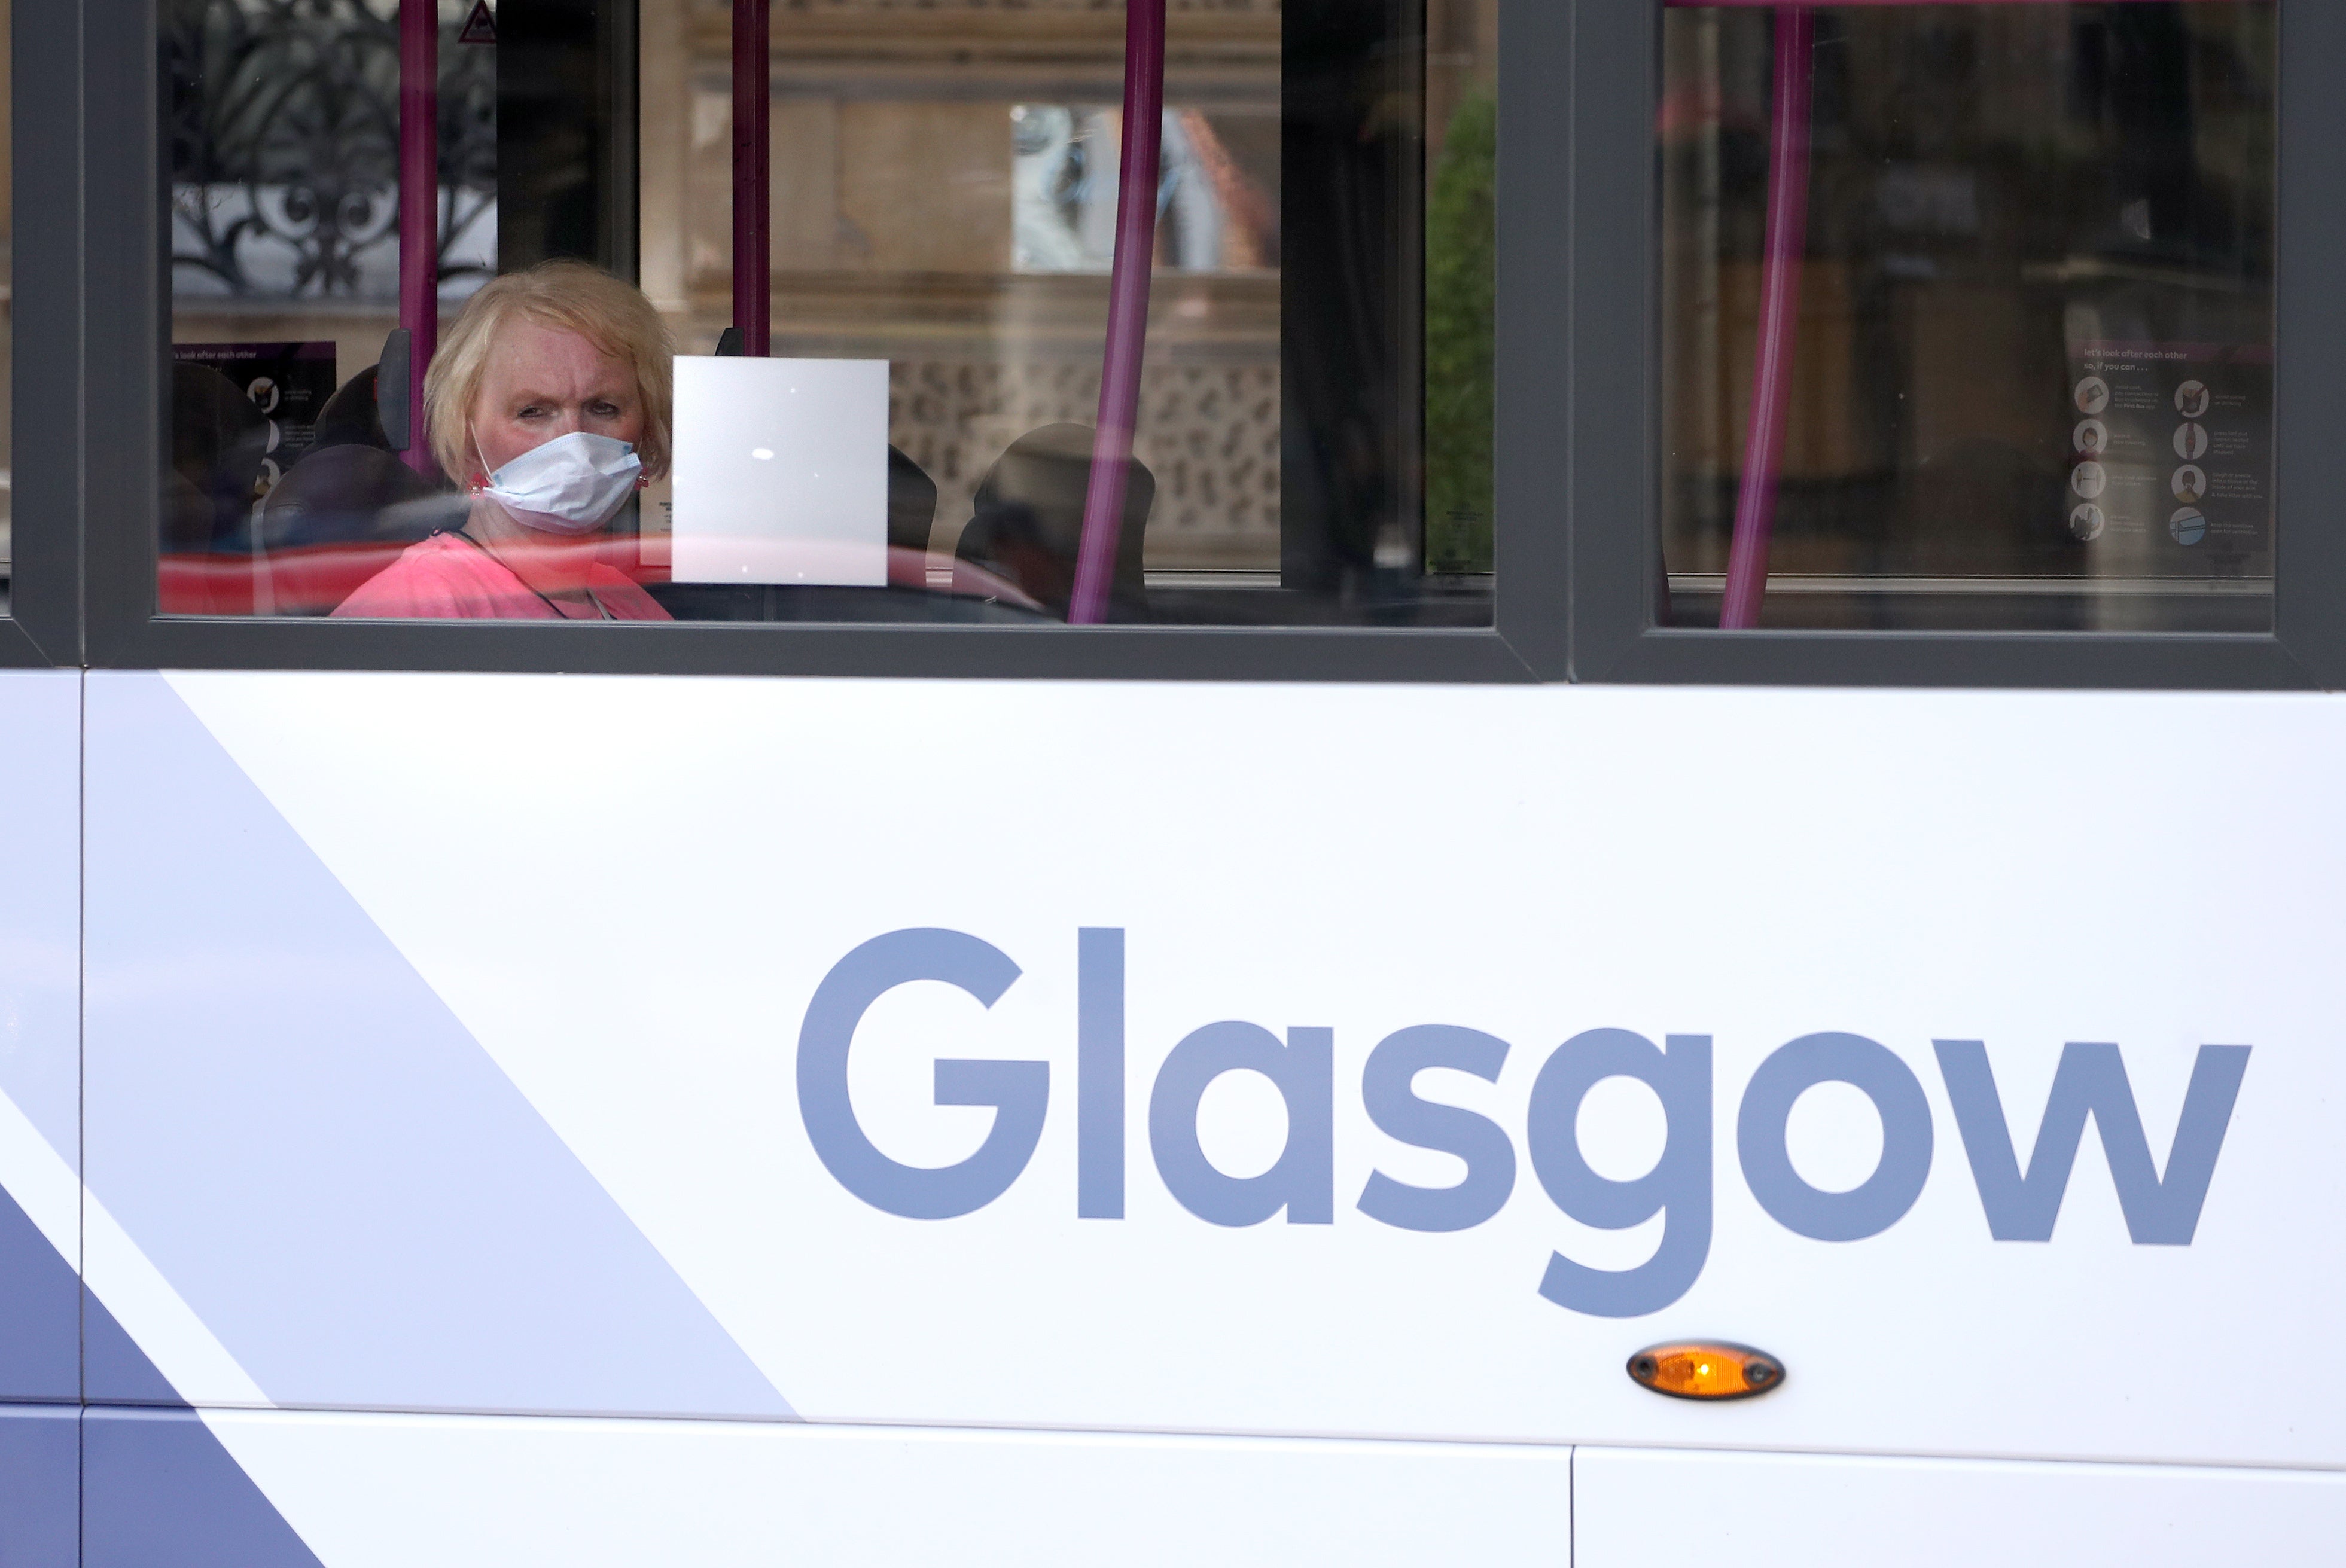 Free bus travel for under 22s will start from Monday (Andrew Milligan/PA)